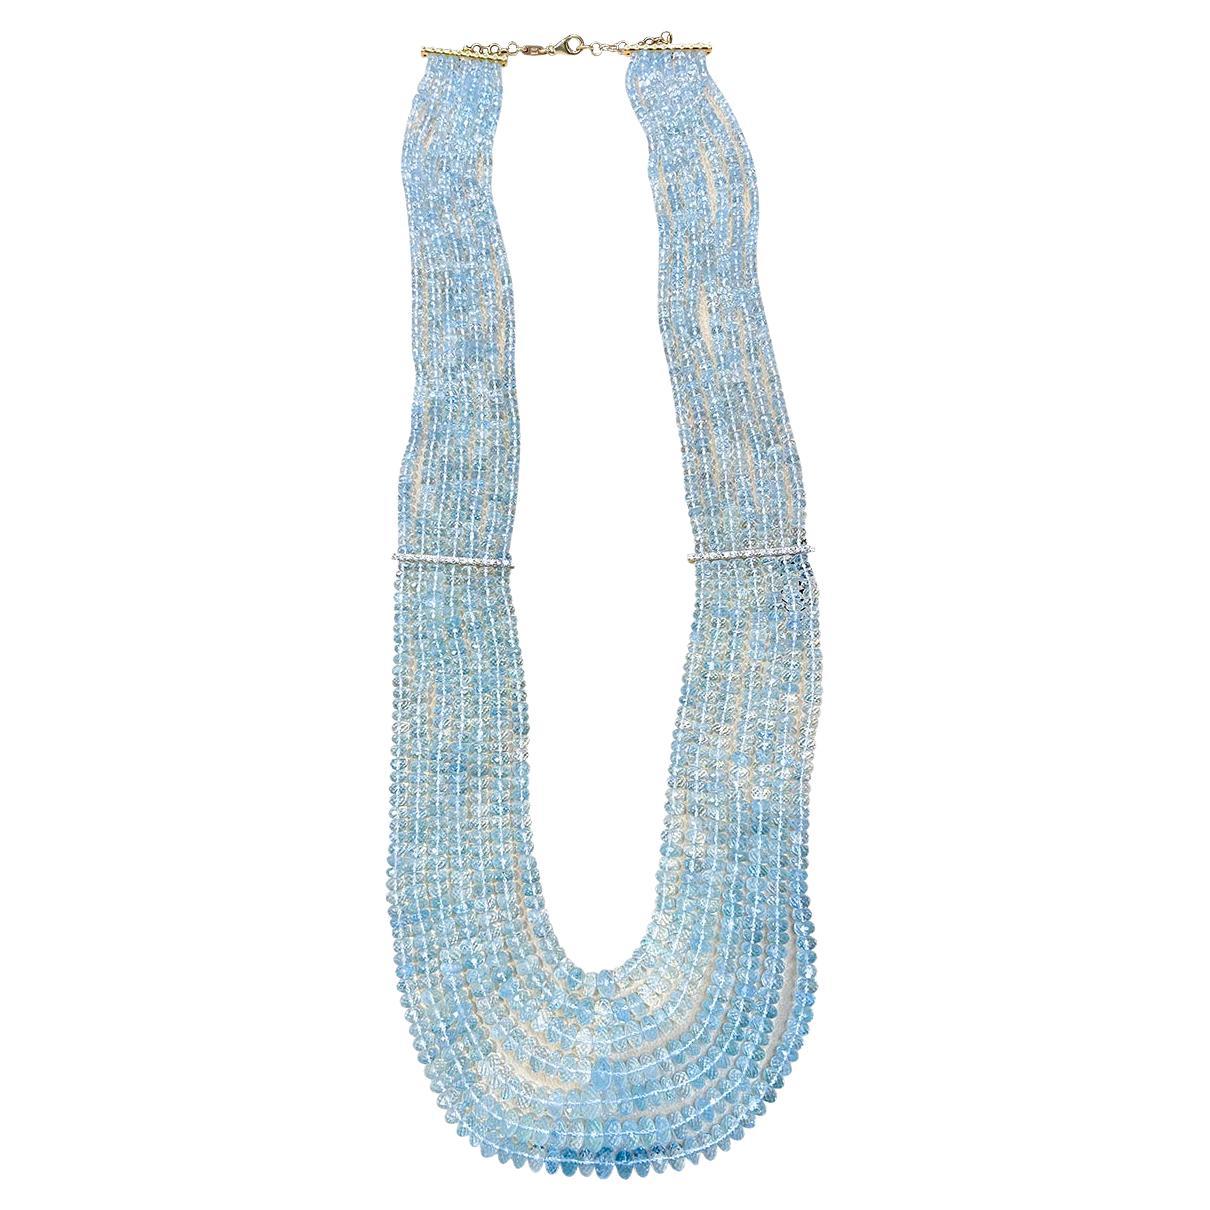 1100 Ct 6 Layer Natural Aquamarine Bead Necklace 14 Kt Gold and Diamond Necklace For Sale